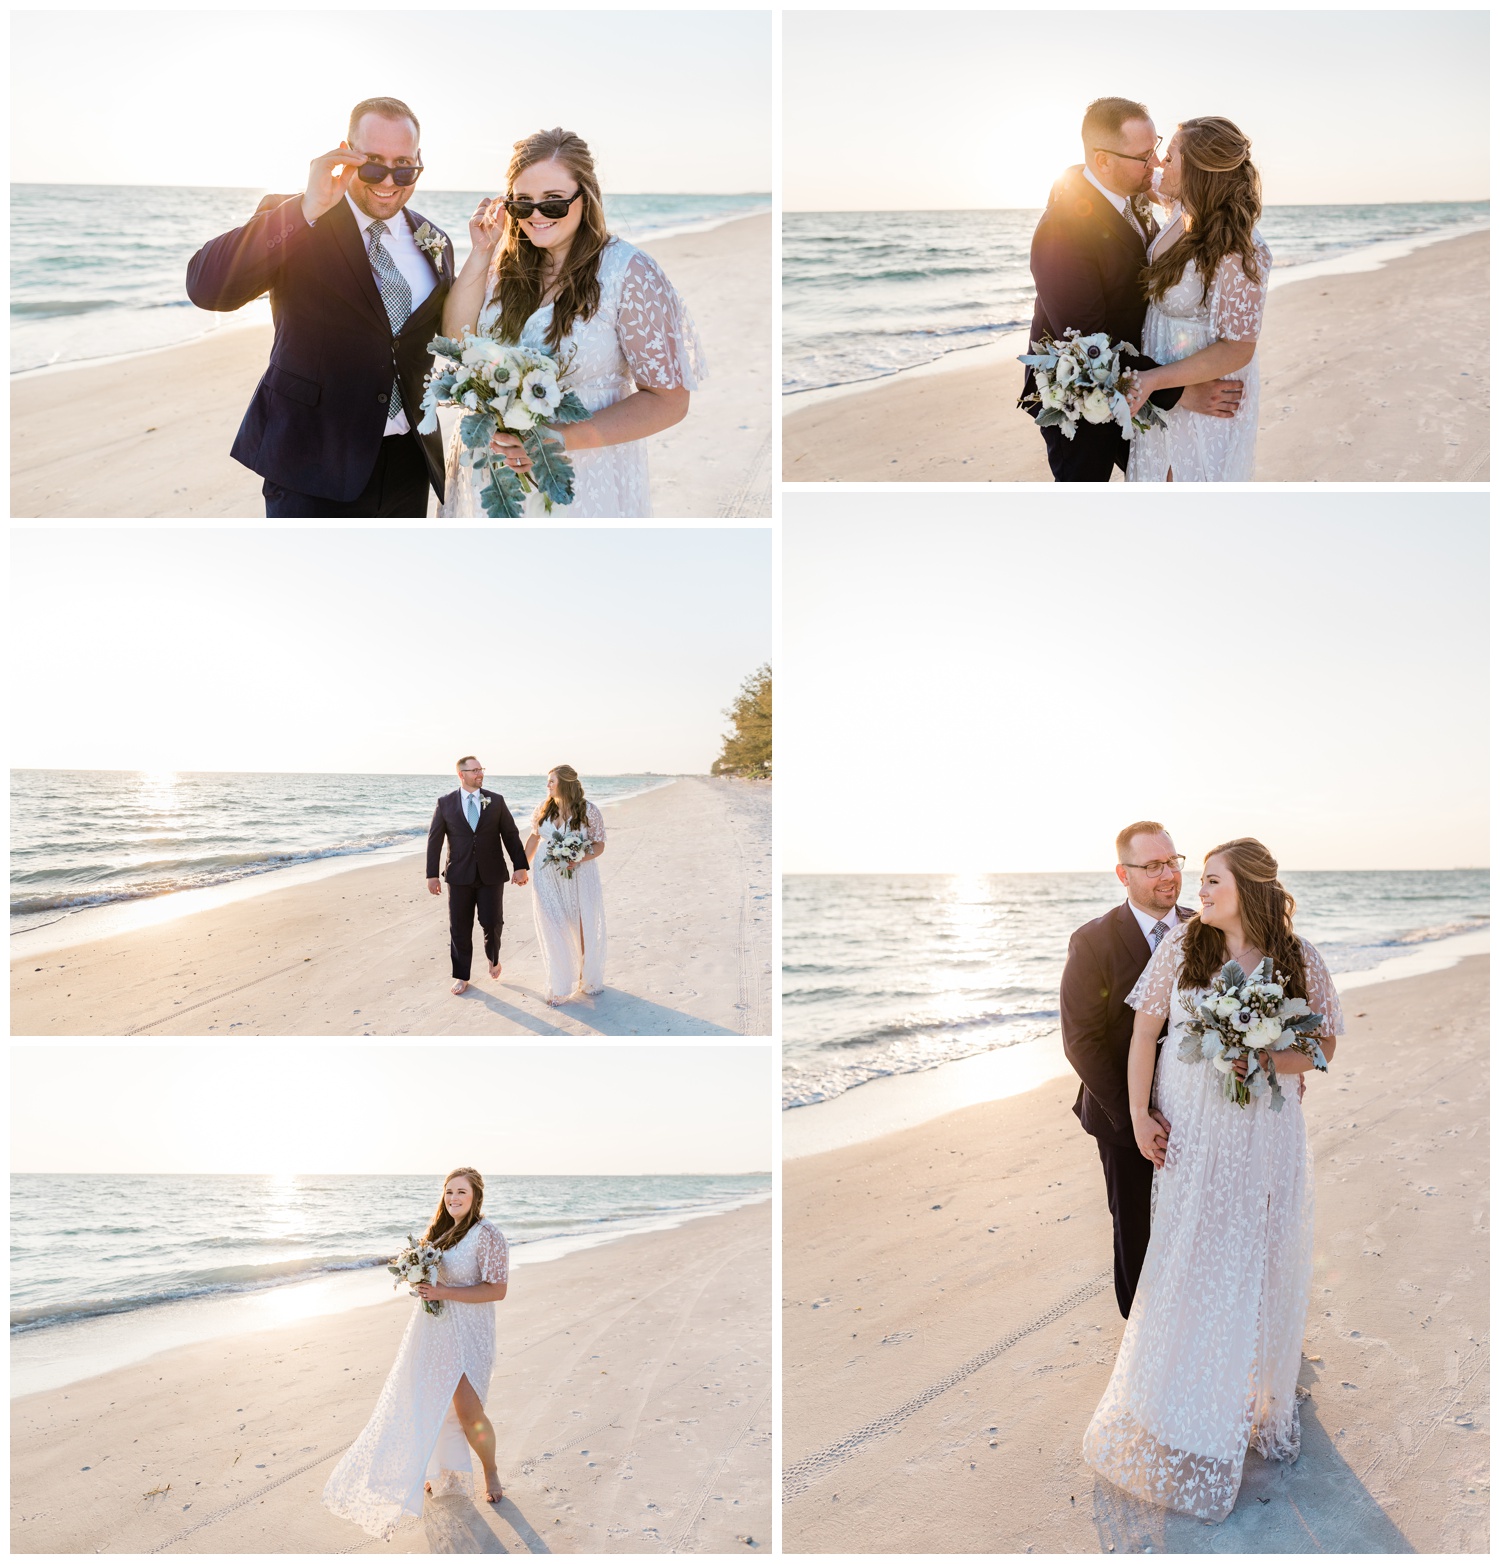 Beach photos in St Pete - The St. Pete Elopement Package - Apt B Photography